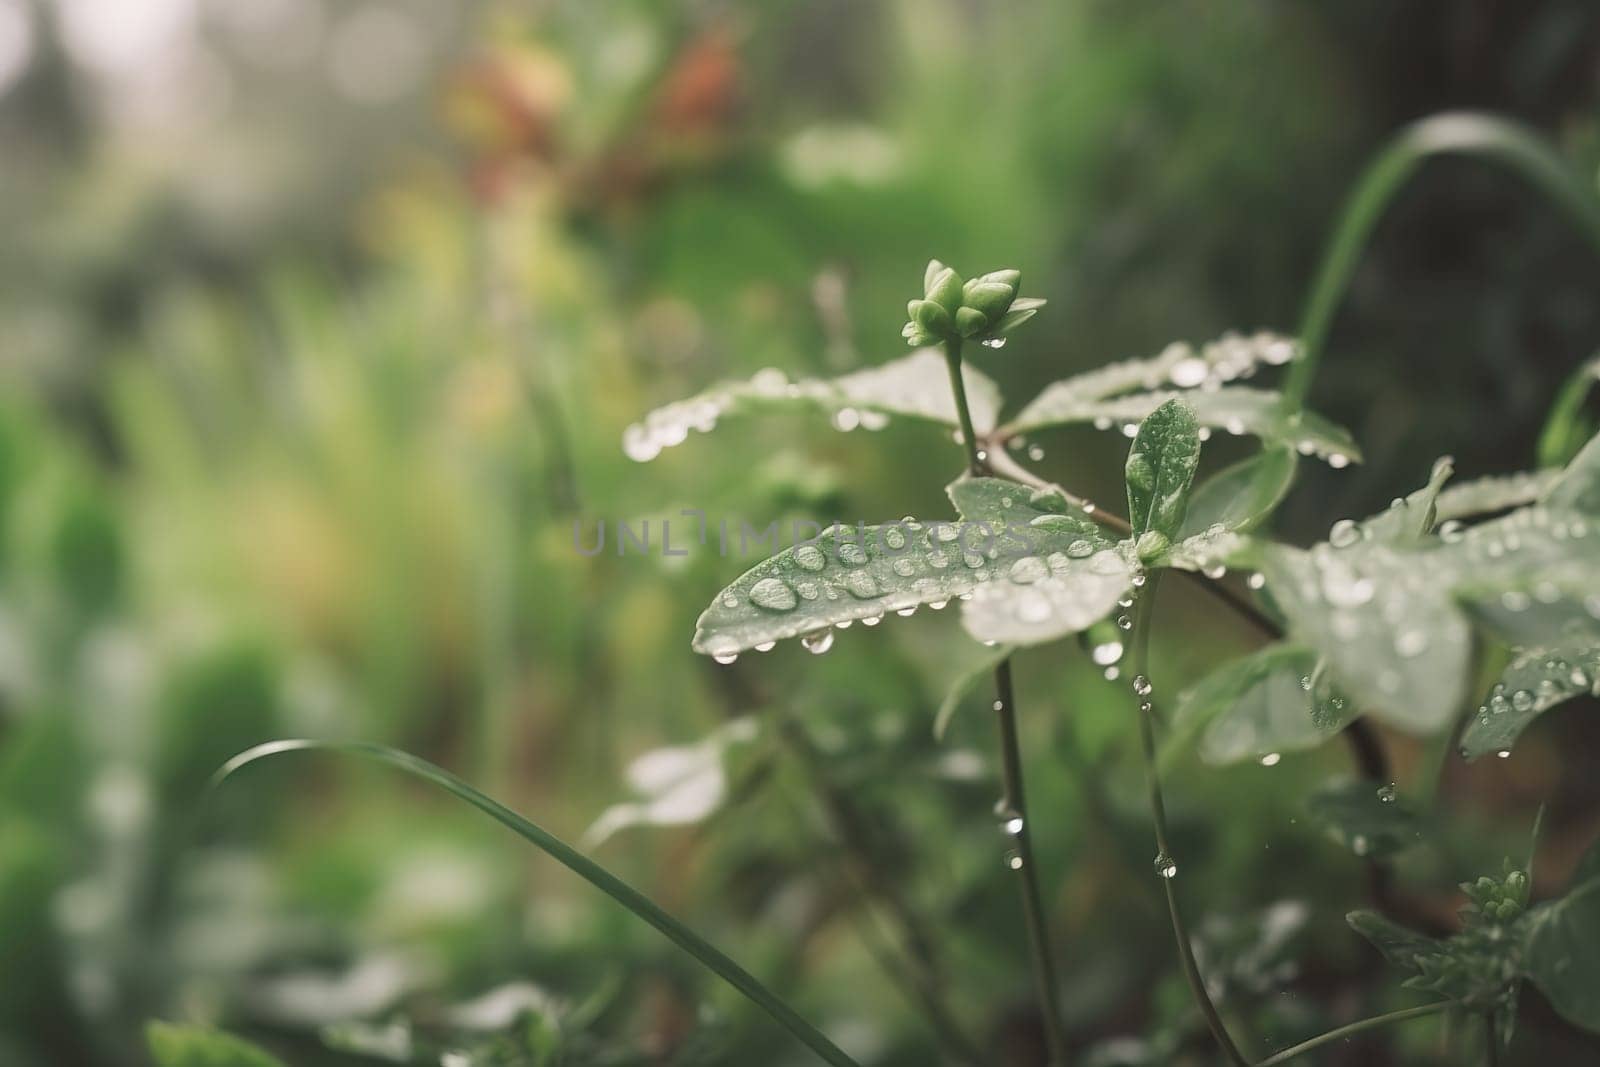 Beautiful plants with dew drops in nature on rainy morning in garden, selective focus. Image in green tones. Spring summer natural background by FokasuArt